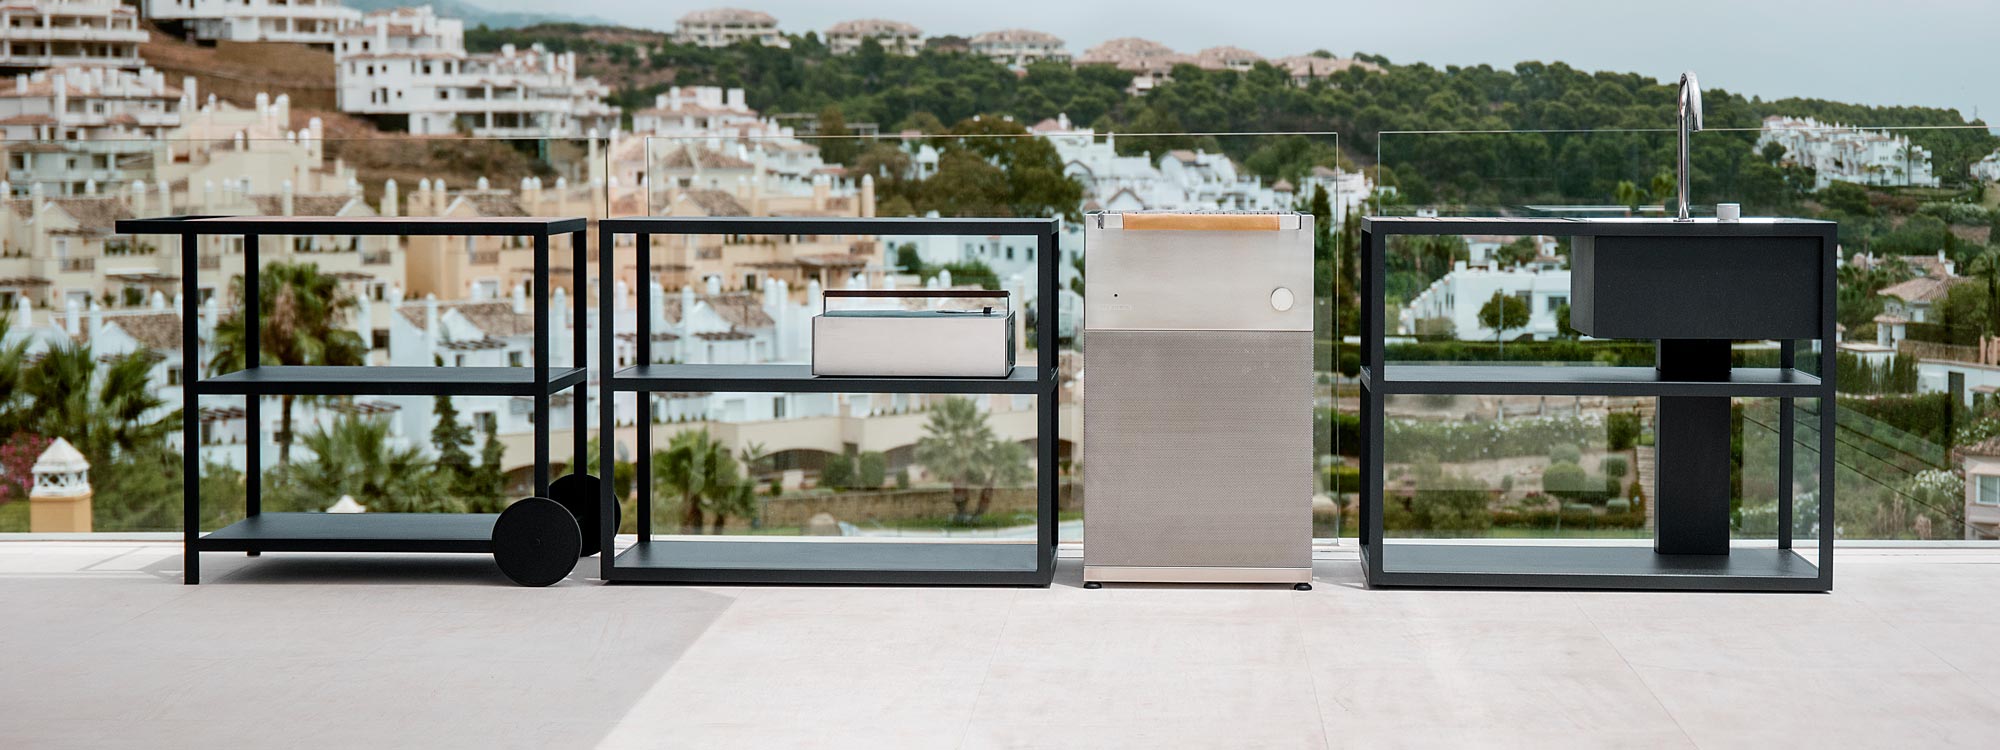 Image of Roshults Booster BBQ Grill on terrace in Southern Spain with villas in background on hillside